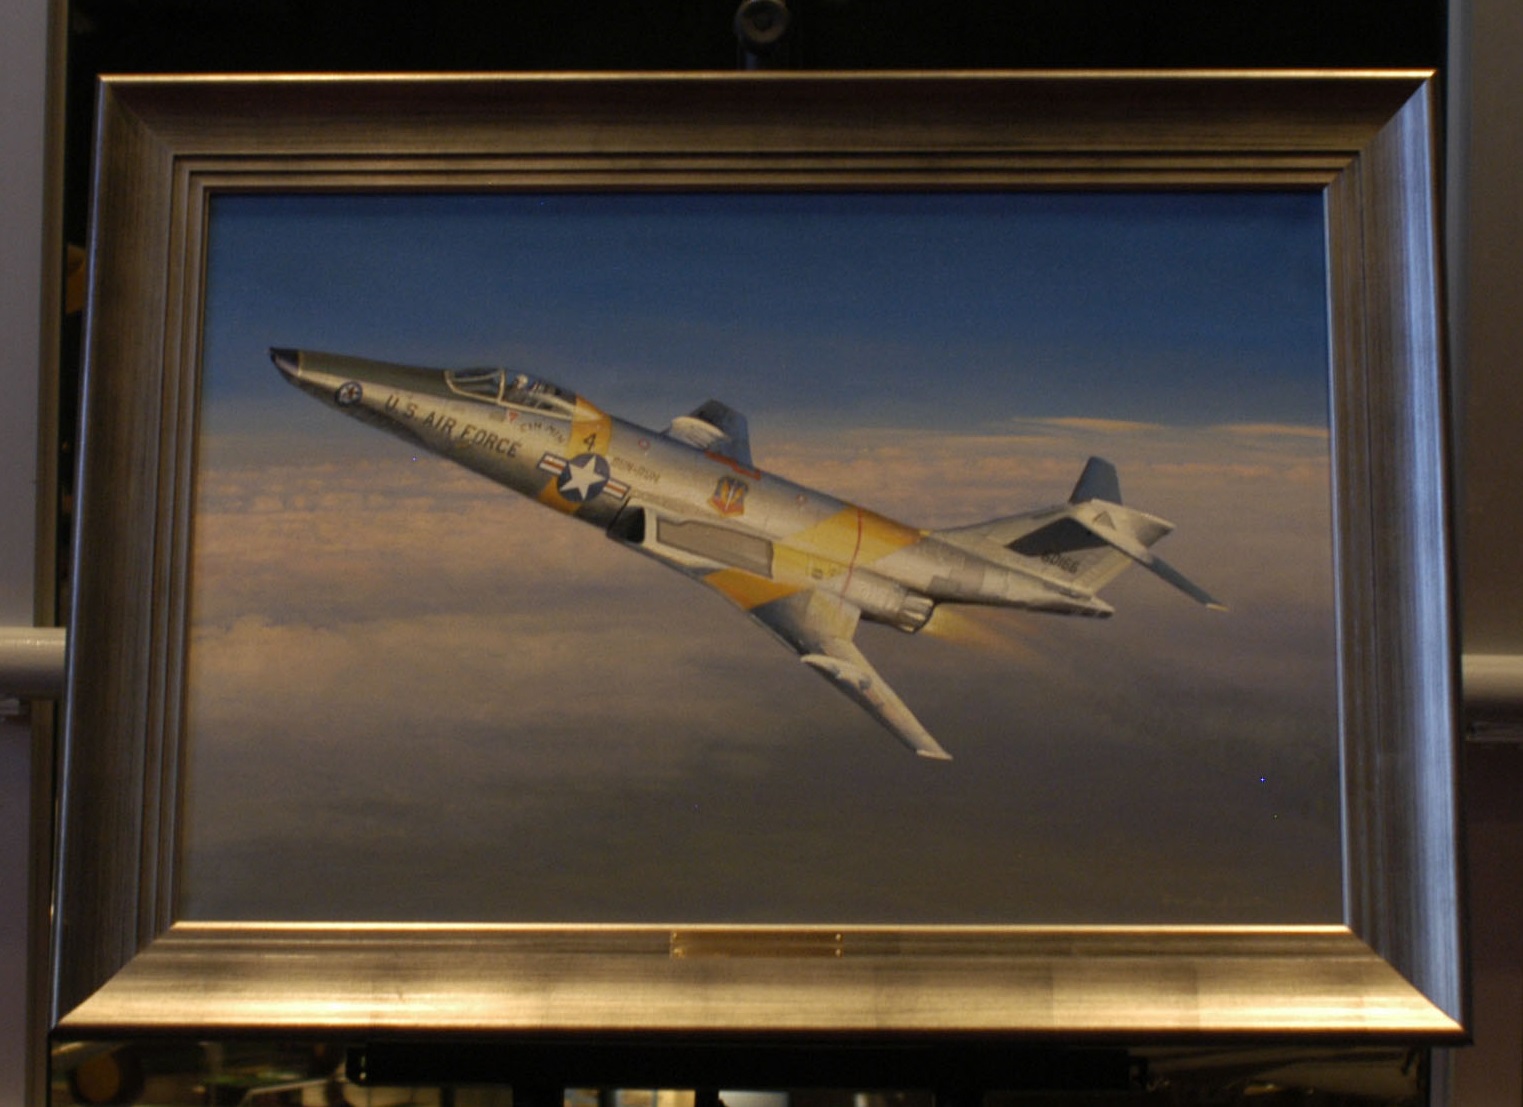 Schrek's Cin-Min on the Sun Run" by William S. Phillips at the National Museum of the United States Air Force, depicts Colonel Schre 's McDonnell RF-101C Voodoo. (U.S. Air Force)